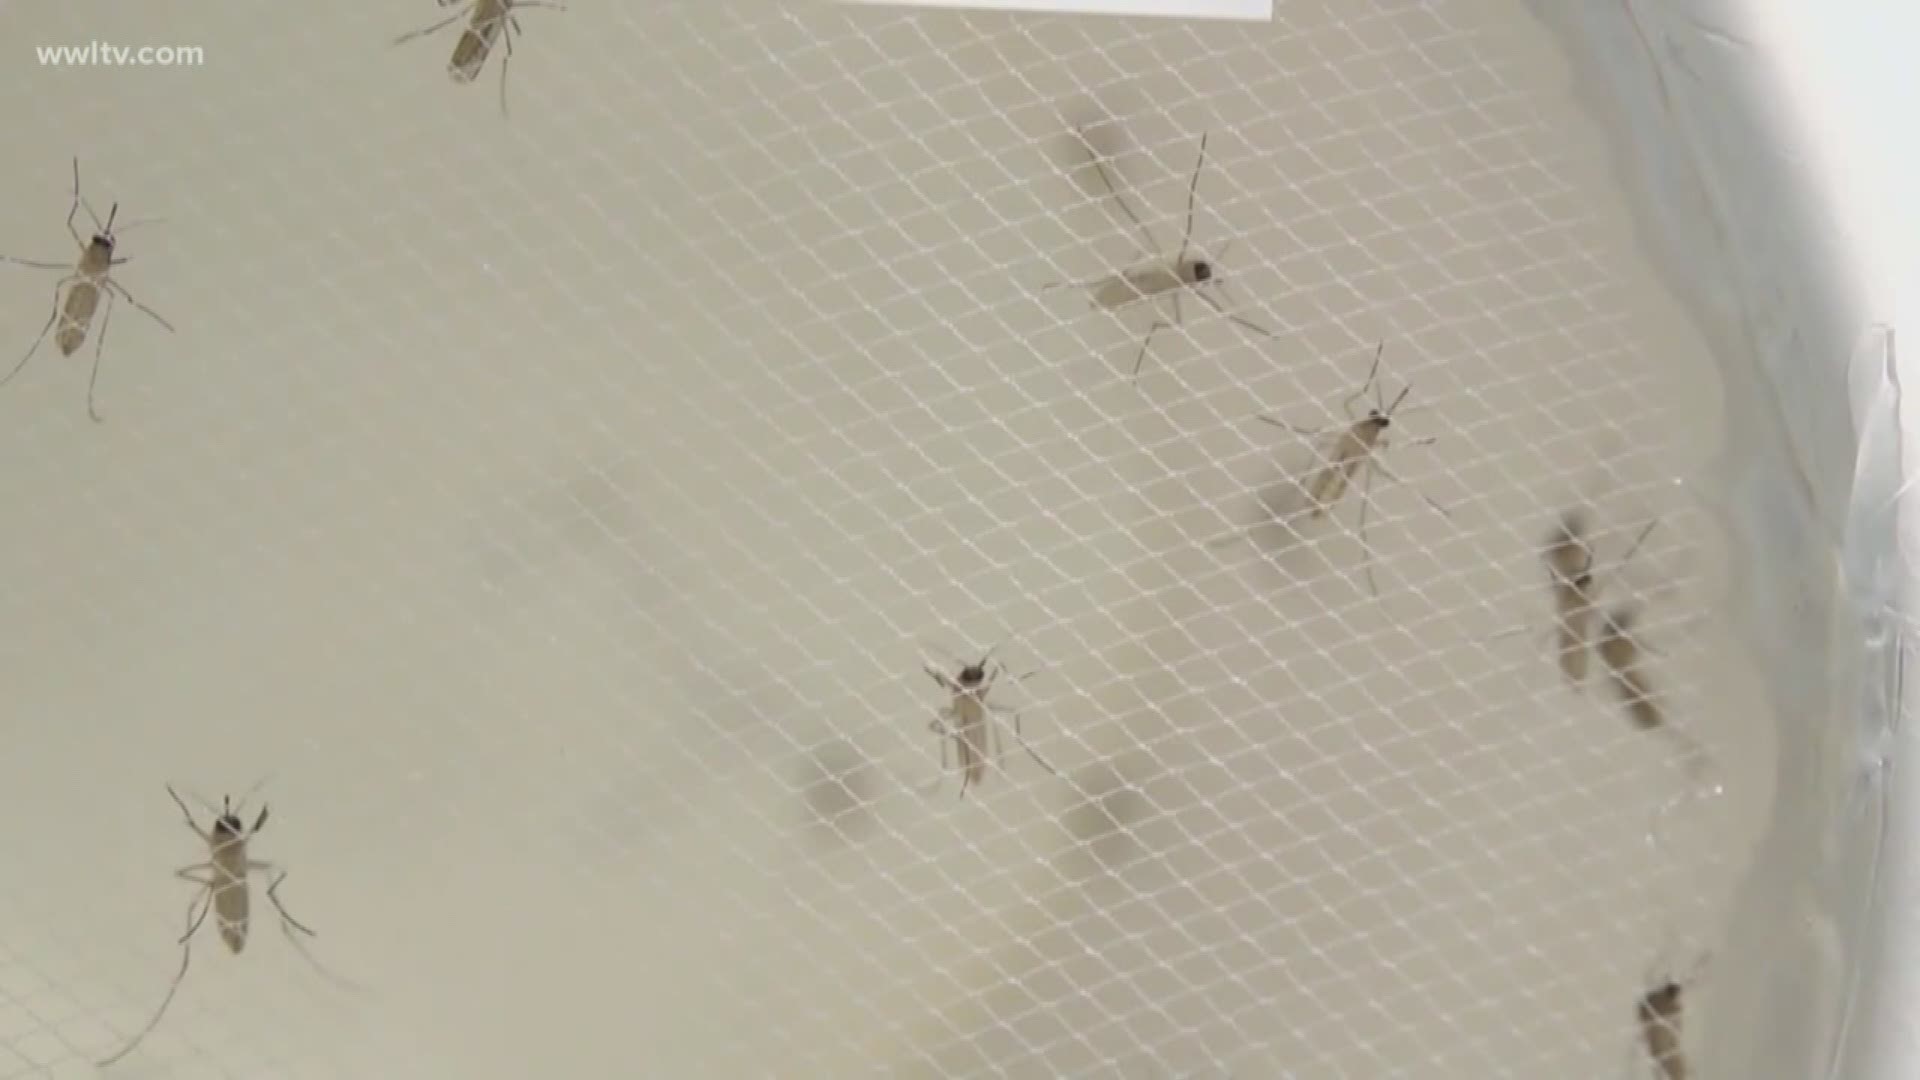 Dr. Wasserman gives us a better understanding of Mosquitoes and what you can do to keep you and your family safe from the viruses they carry.